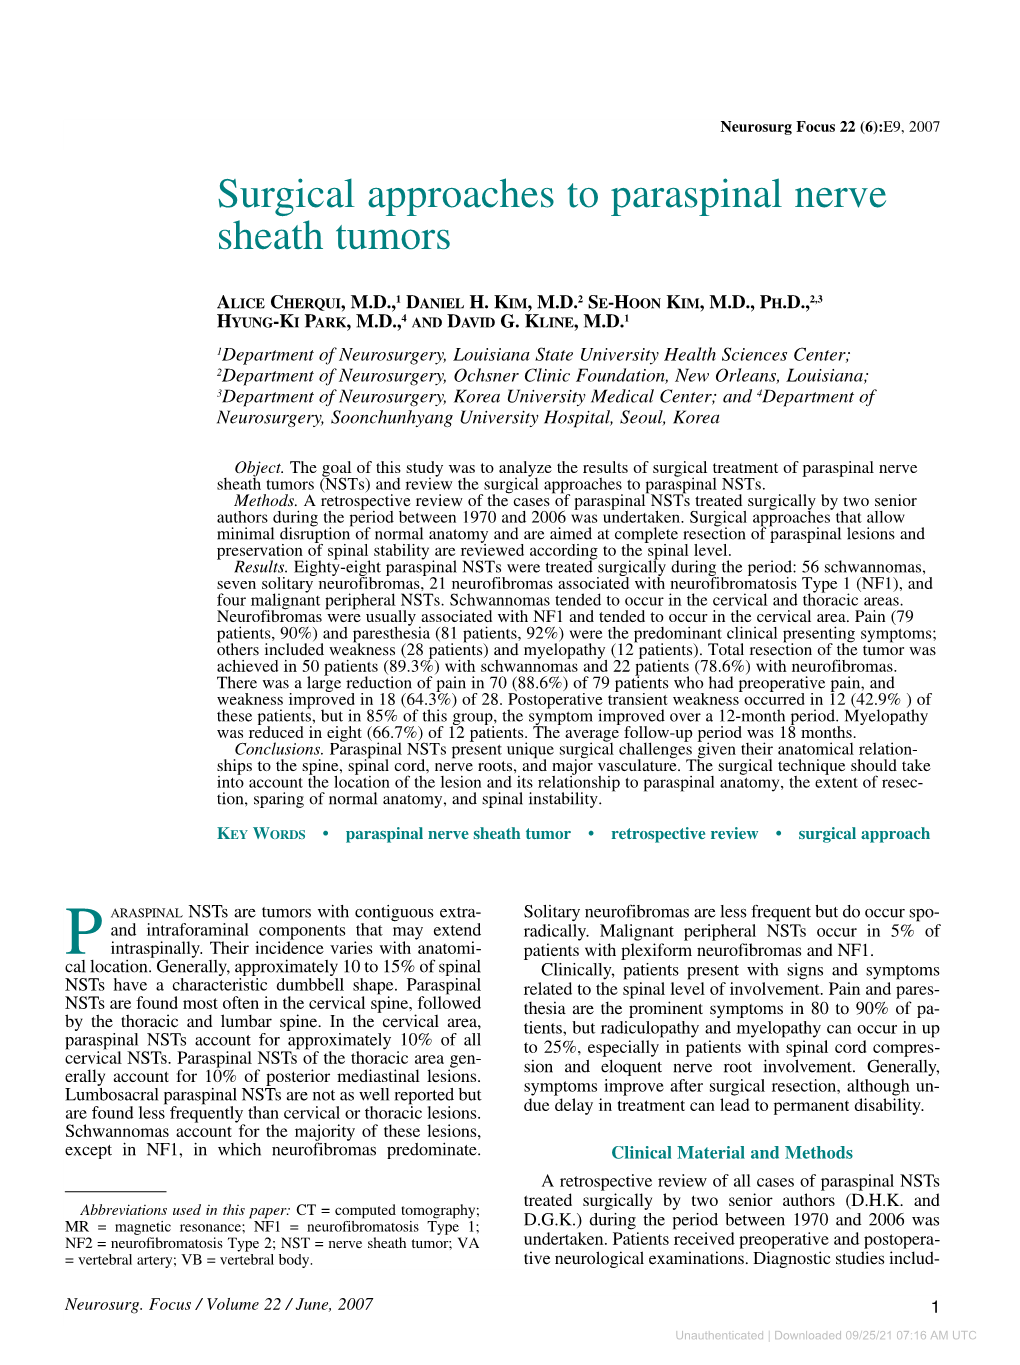 Surgical Approaches to Paraspinal Nerve Sheath Tumors